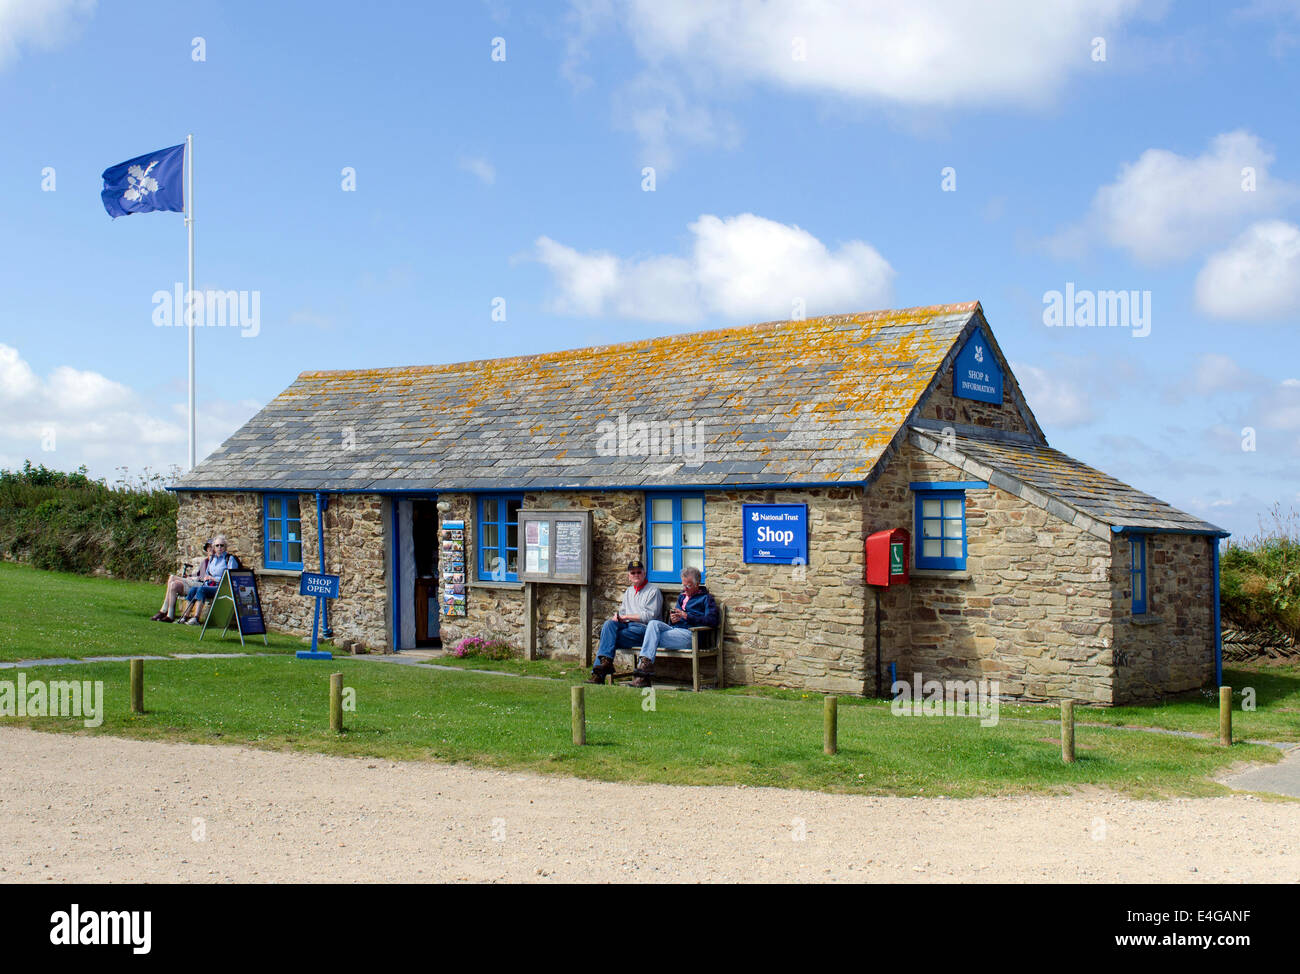 a national trust gift shop at bedruthan in cornwall, uk.  ( this photograph was taken from public land ) Stock Photo